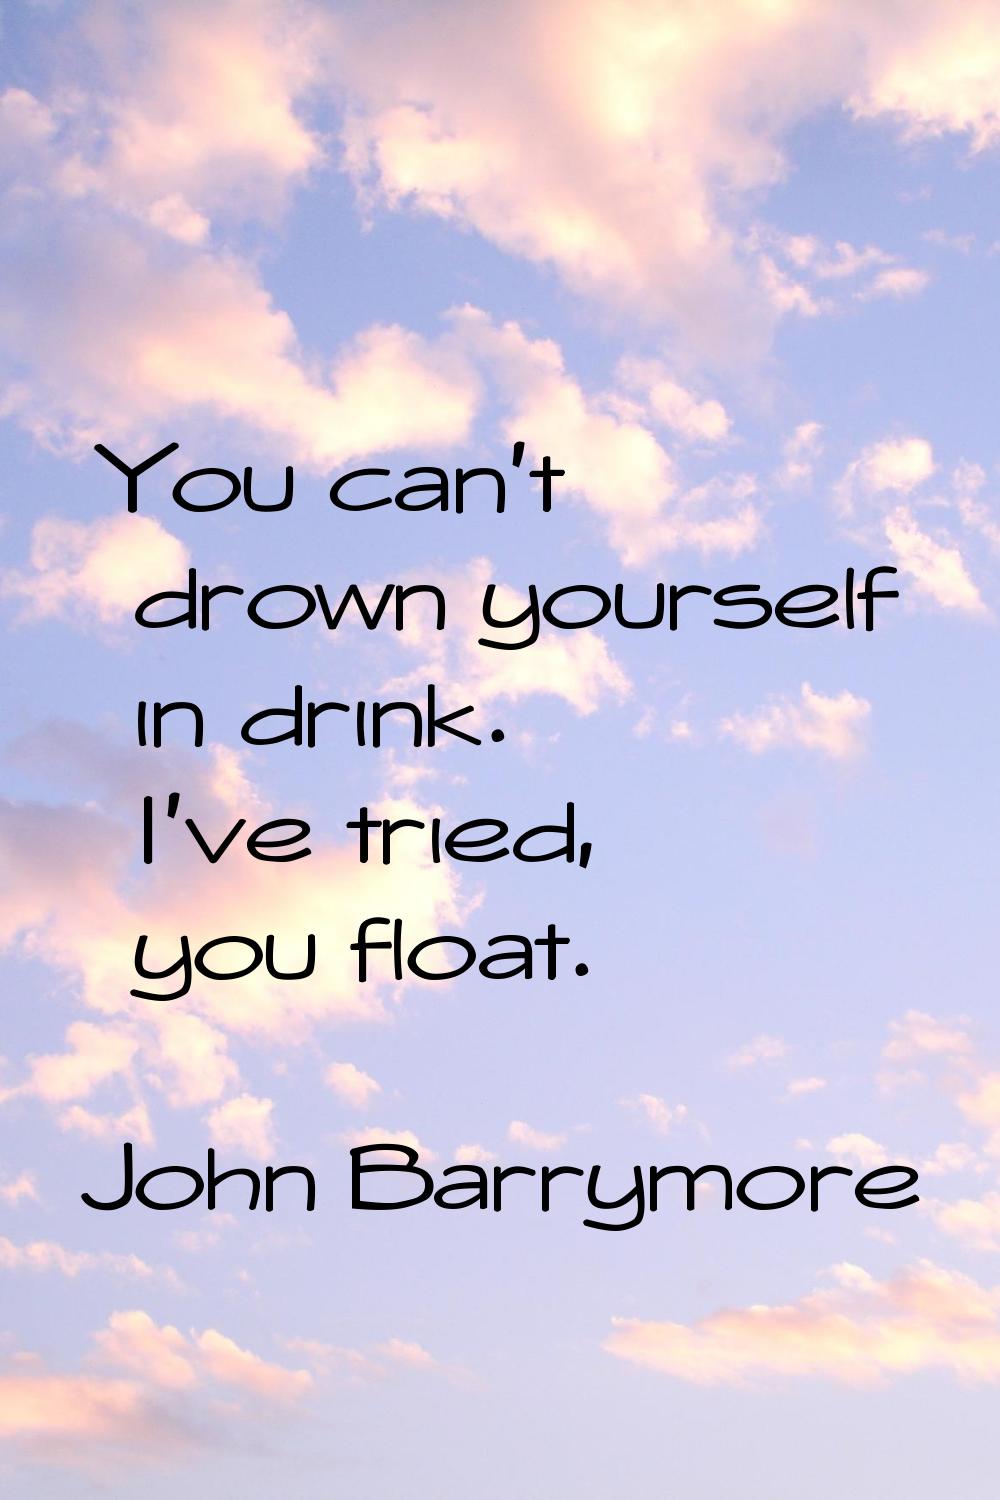 You can't drown yourself in drink. I've tried, you float.